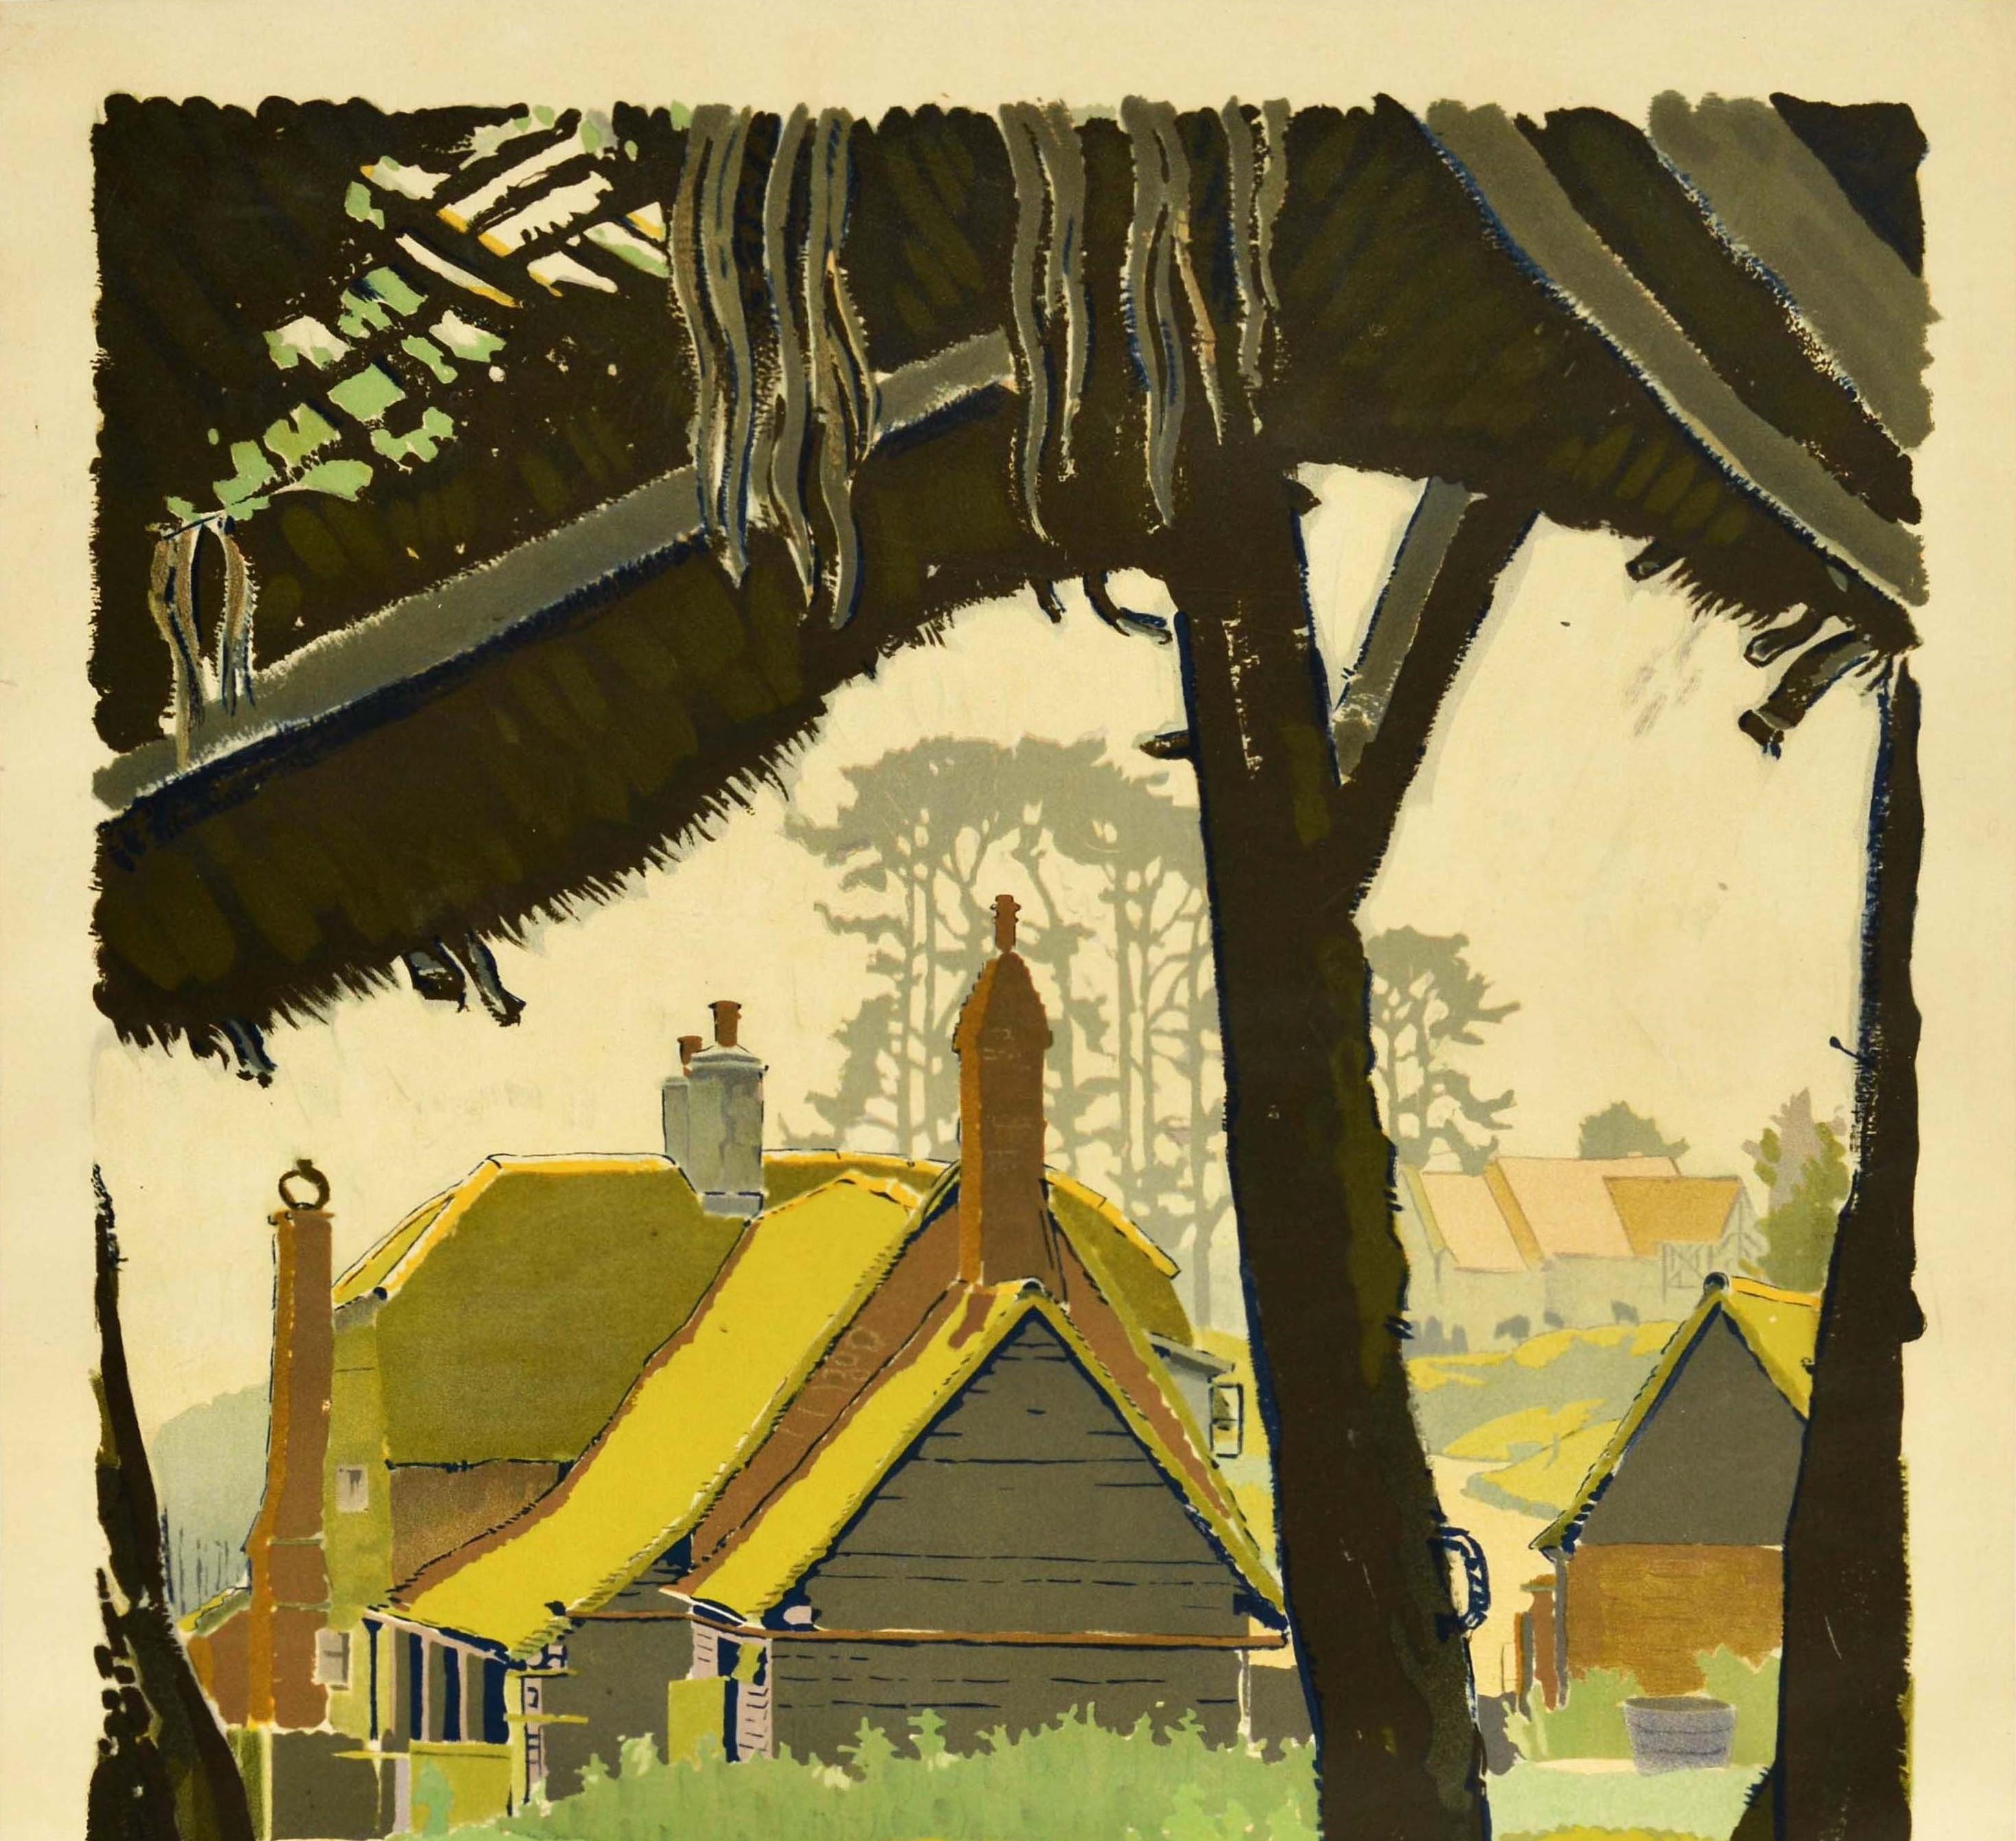 Original vintage London transport travel poster featuring artwork by the English artist and designer Frederic Gregory Brown (1887-1941) of a picturesque view of the historic Little Hampden village in Buckinghamshire with the text below - It's a